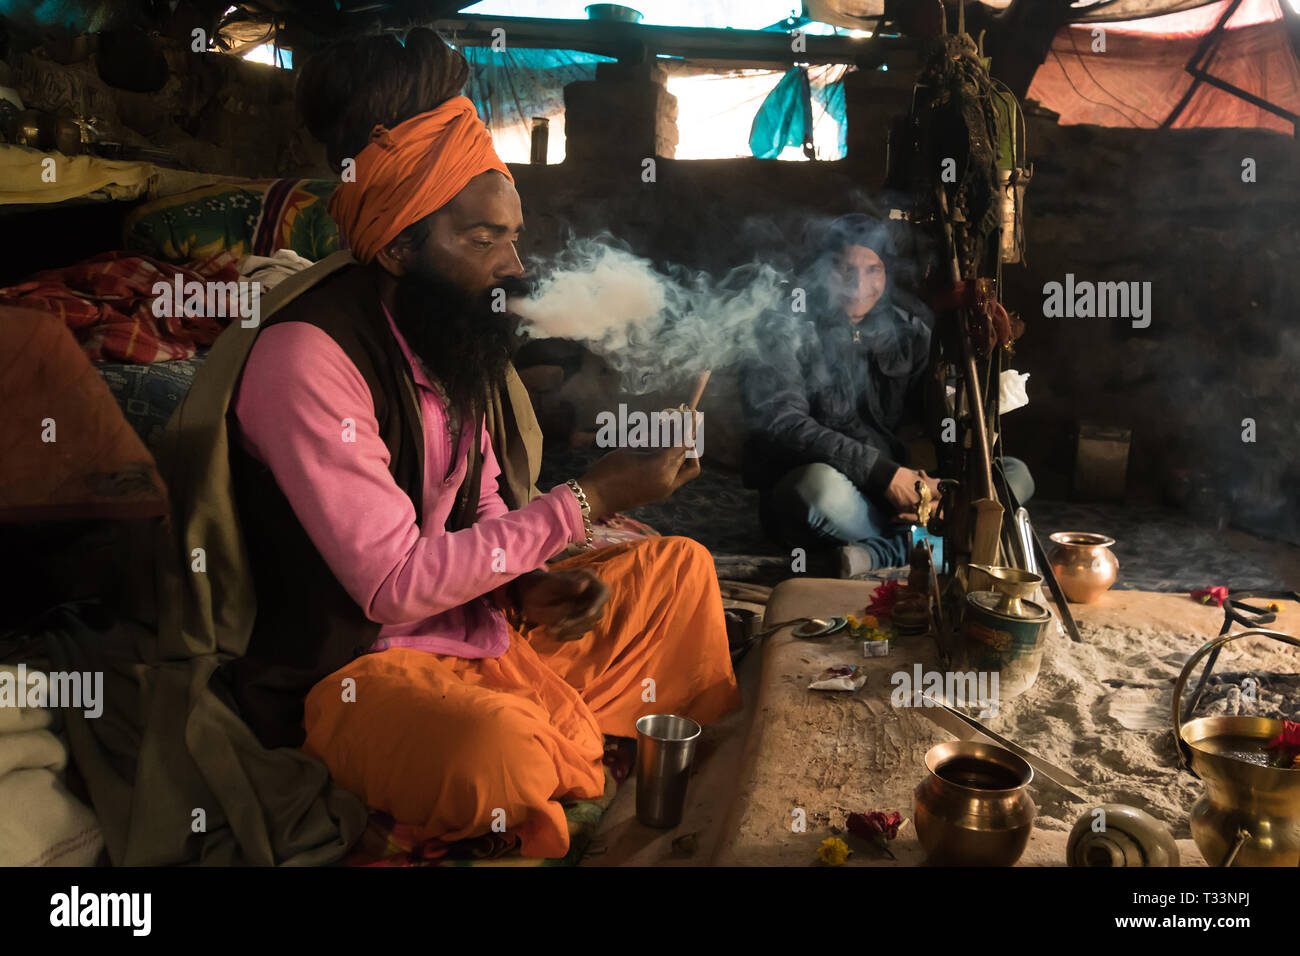 Goa, INDIA - January 11, 2018: hermit sadhu smokes a narcotic compound sitting in a hut emitting a large tangle of smoke. Babba ascetic lives in poor  Stock Photo